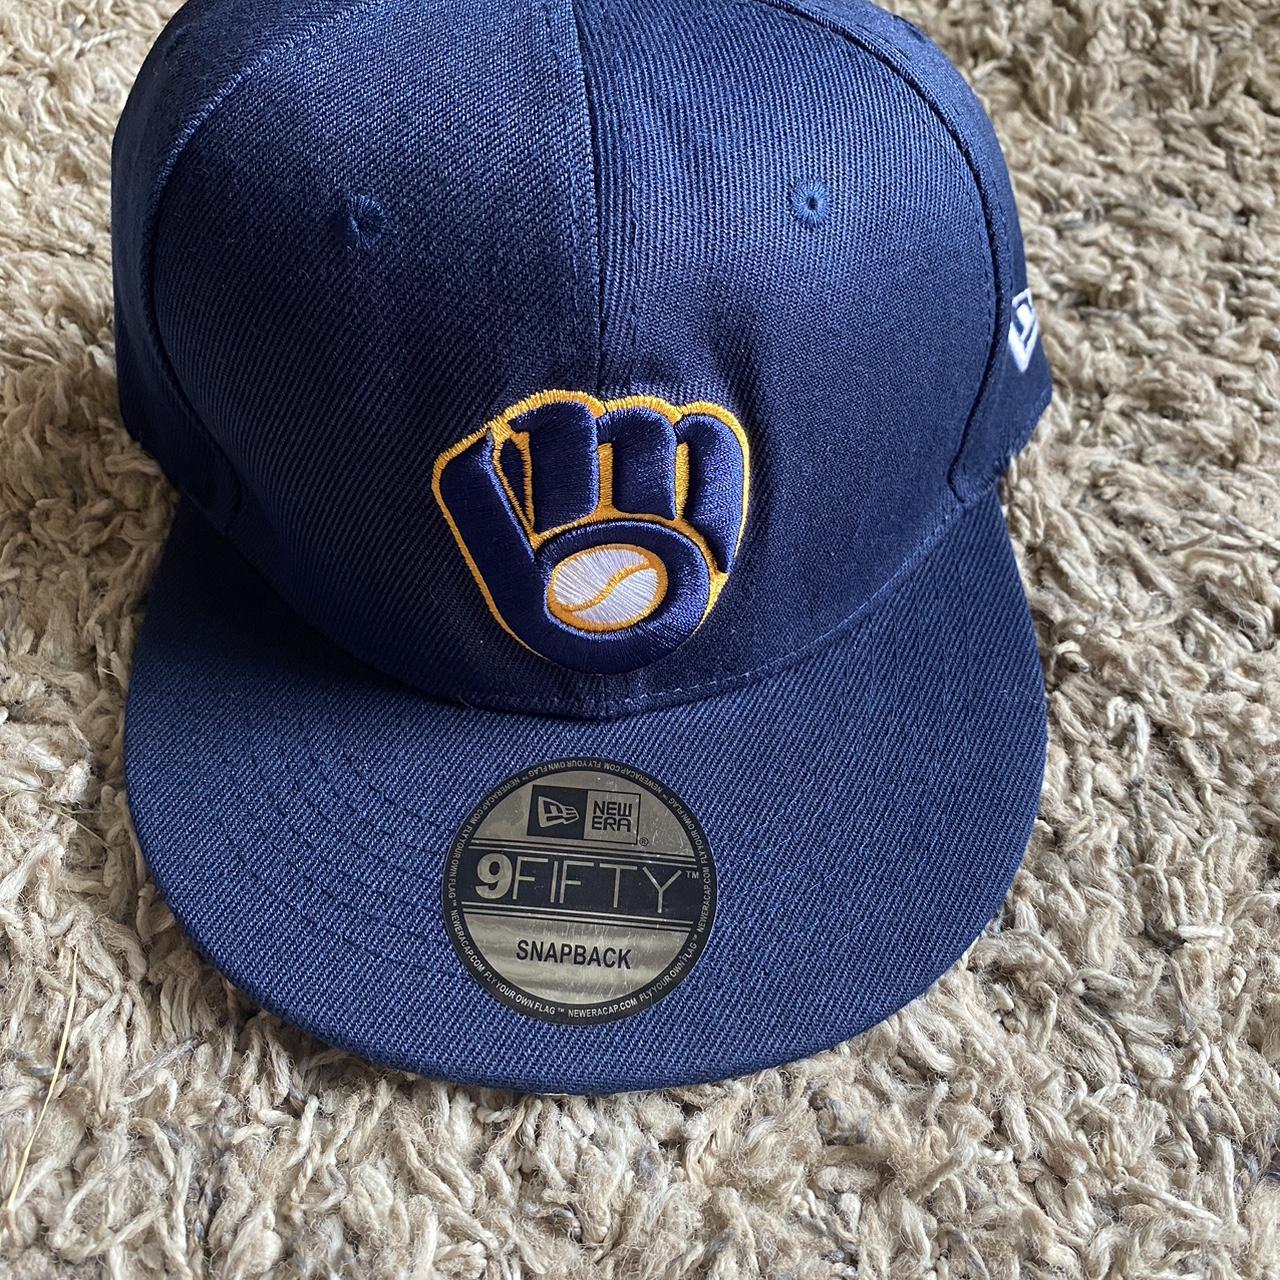 Our logo looks good on every hat, but - Milwaukee Brewers